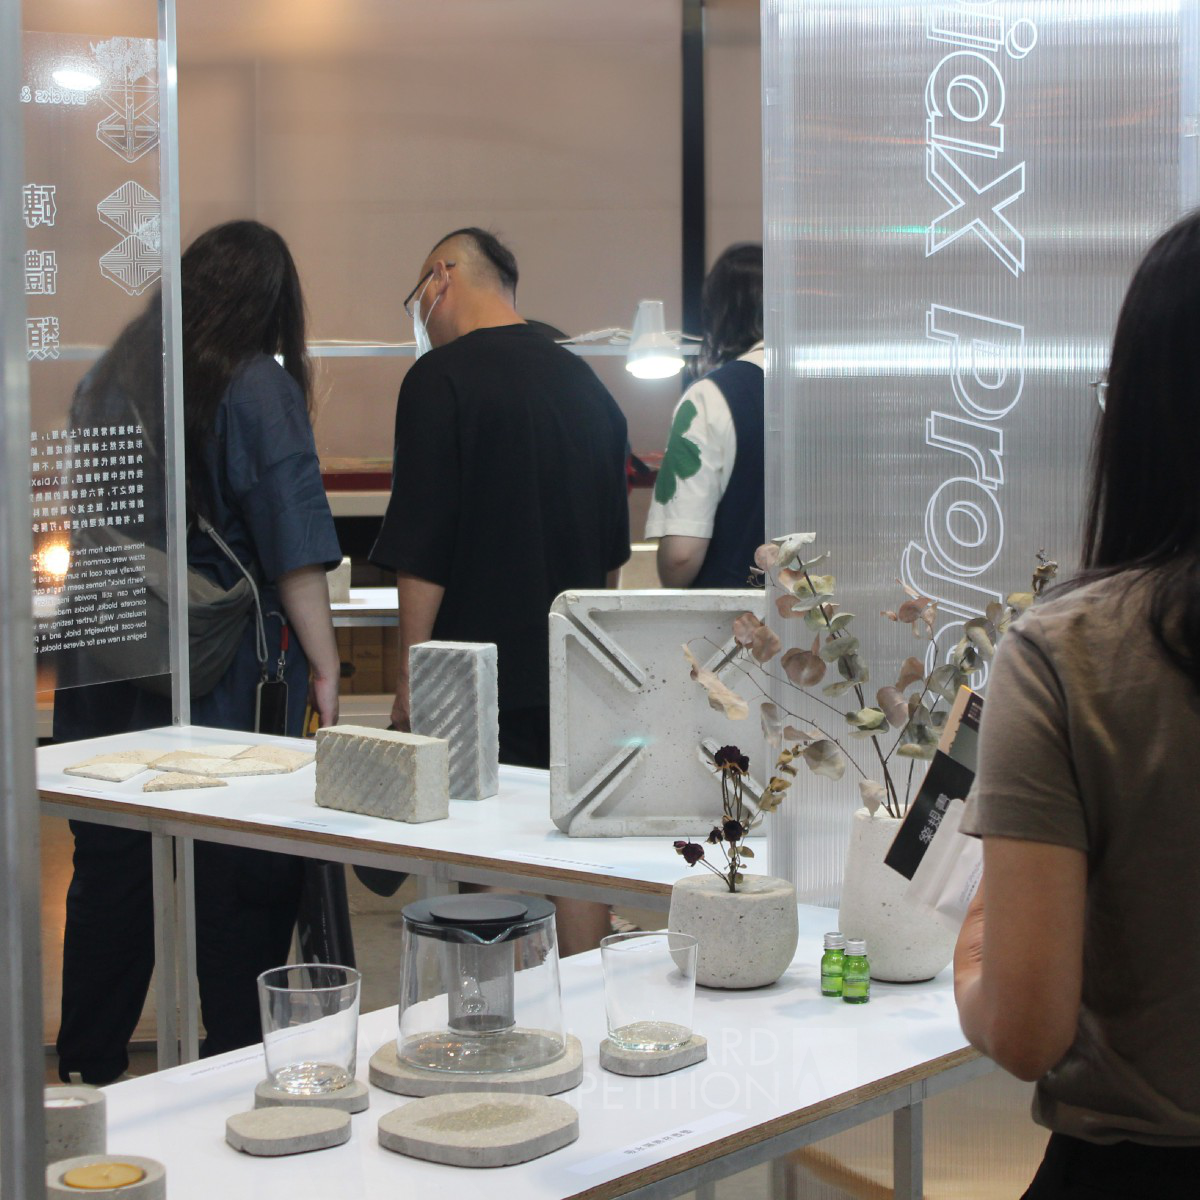 Diax Project Showcase Exhibition by Leafer Circular Design